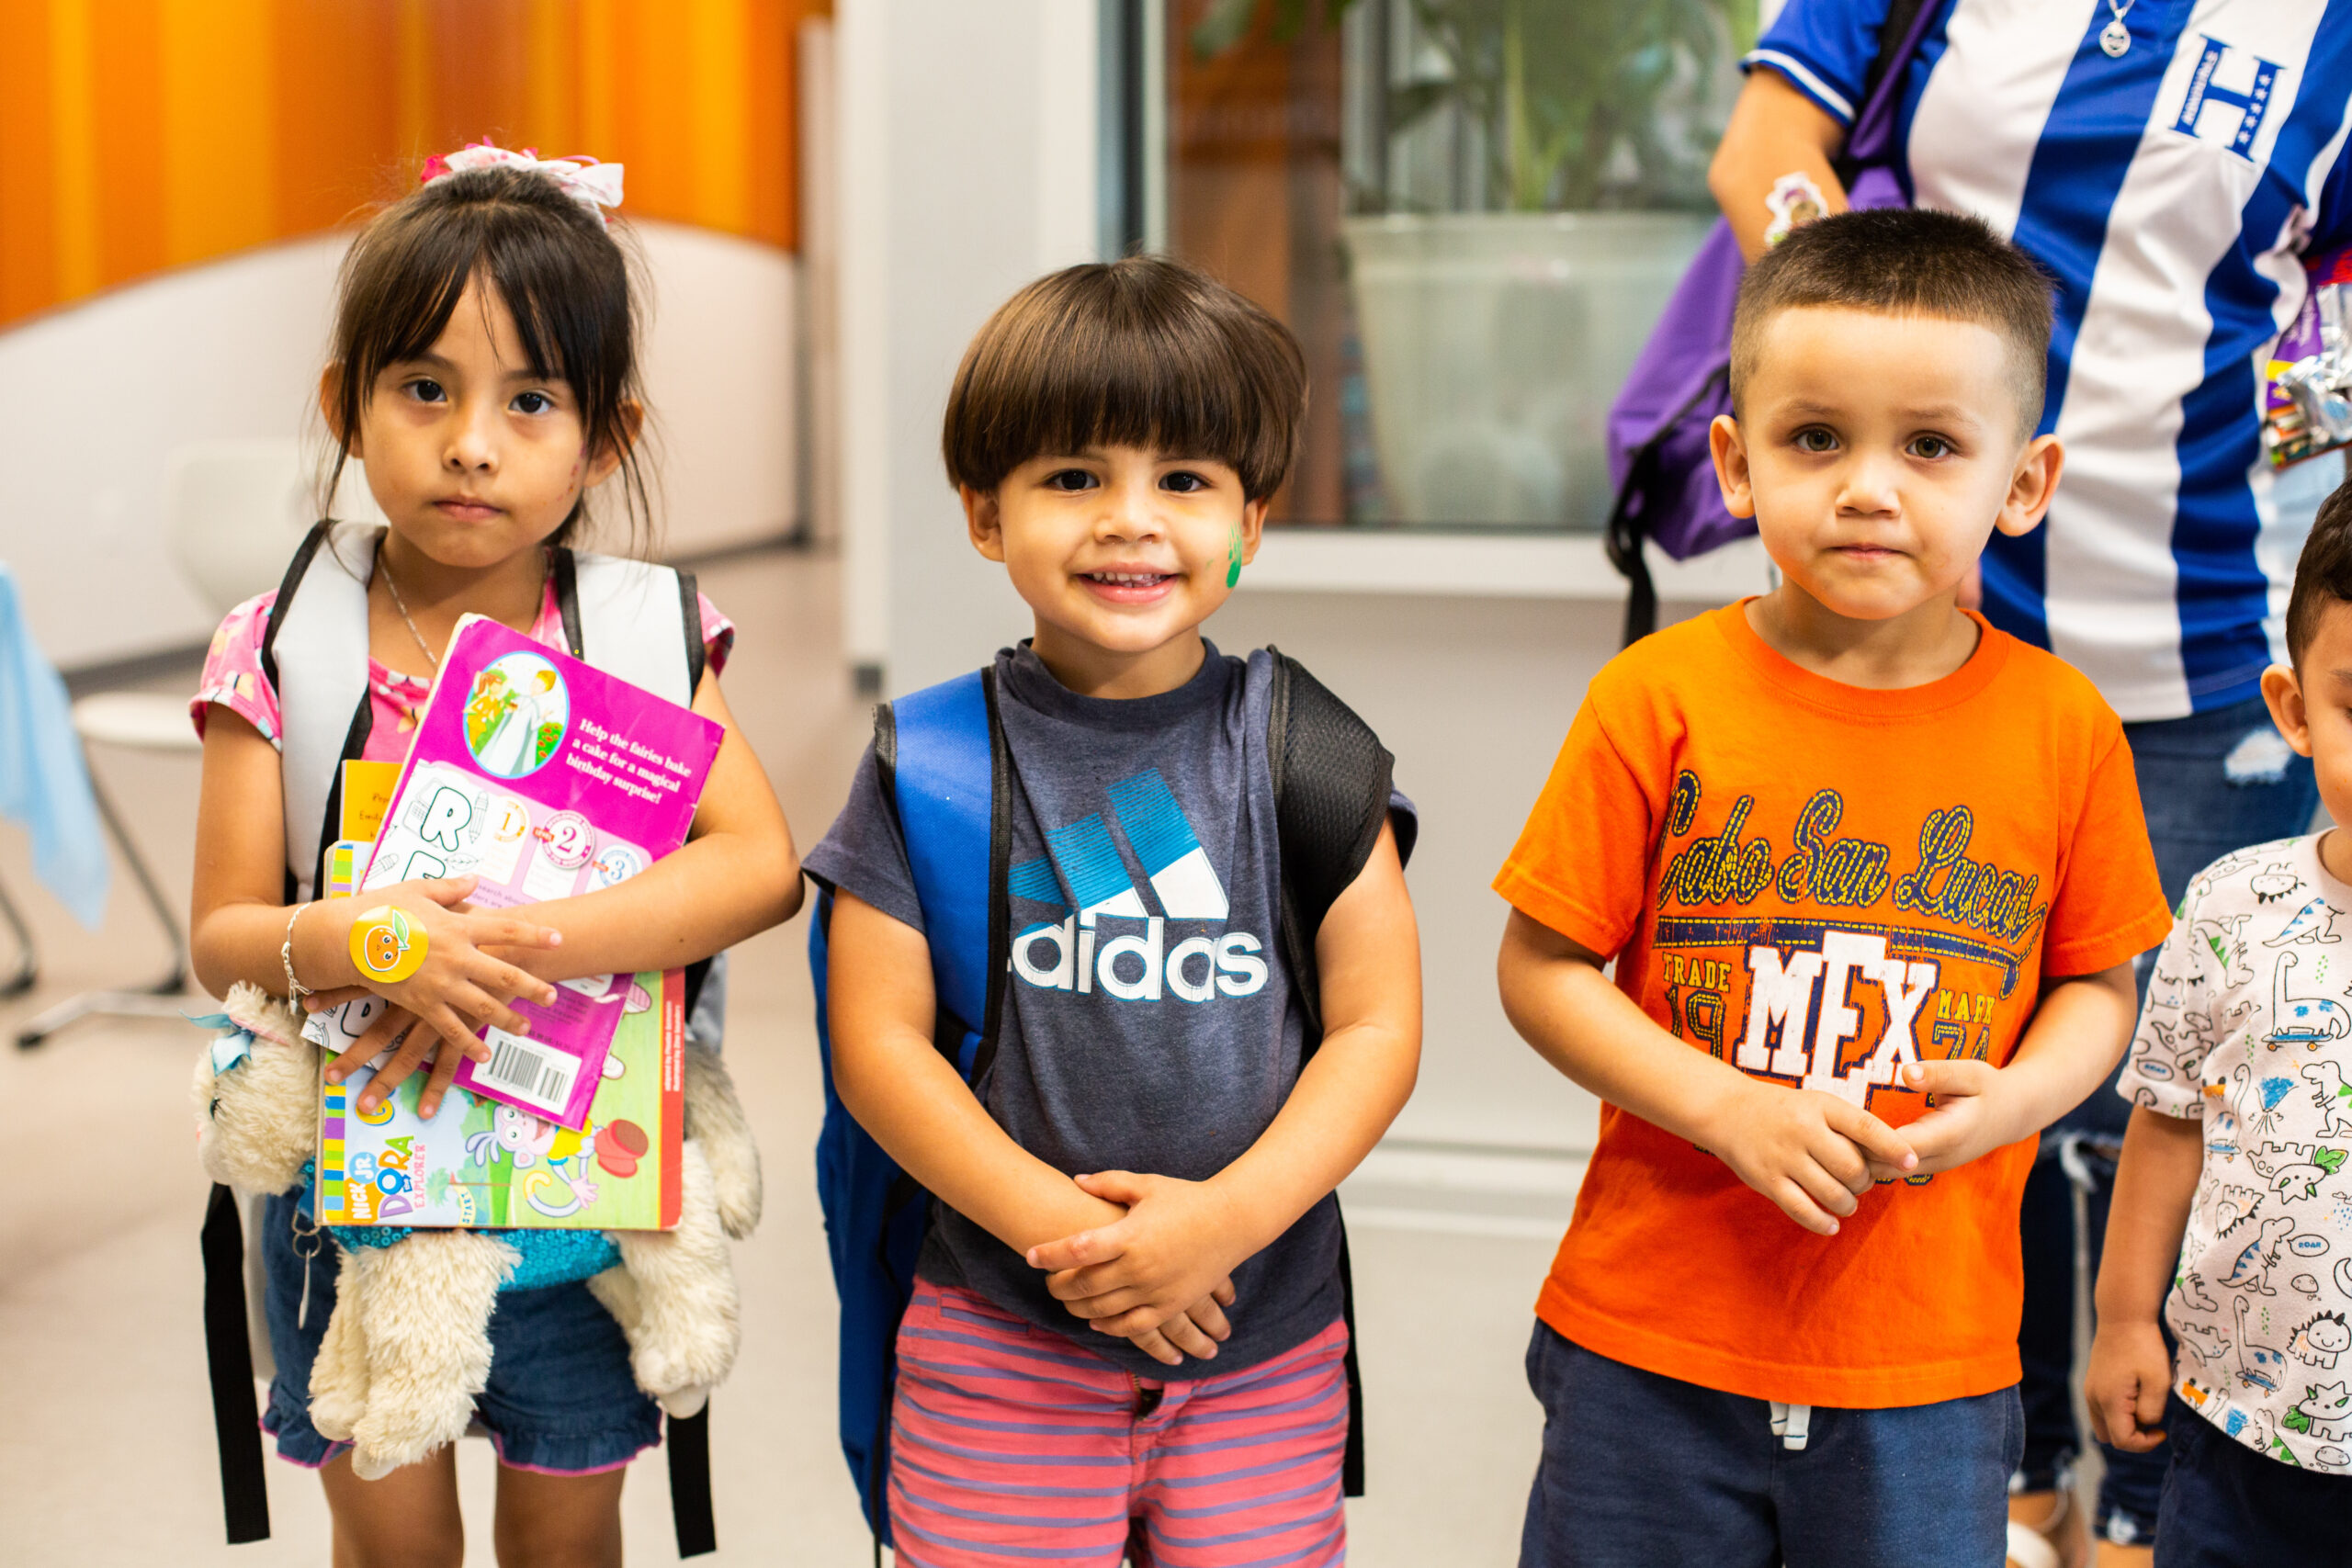 United Way's Navigation Center is here to help local families find free back-to-school resources in Greater Austin